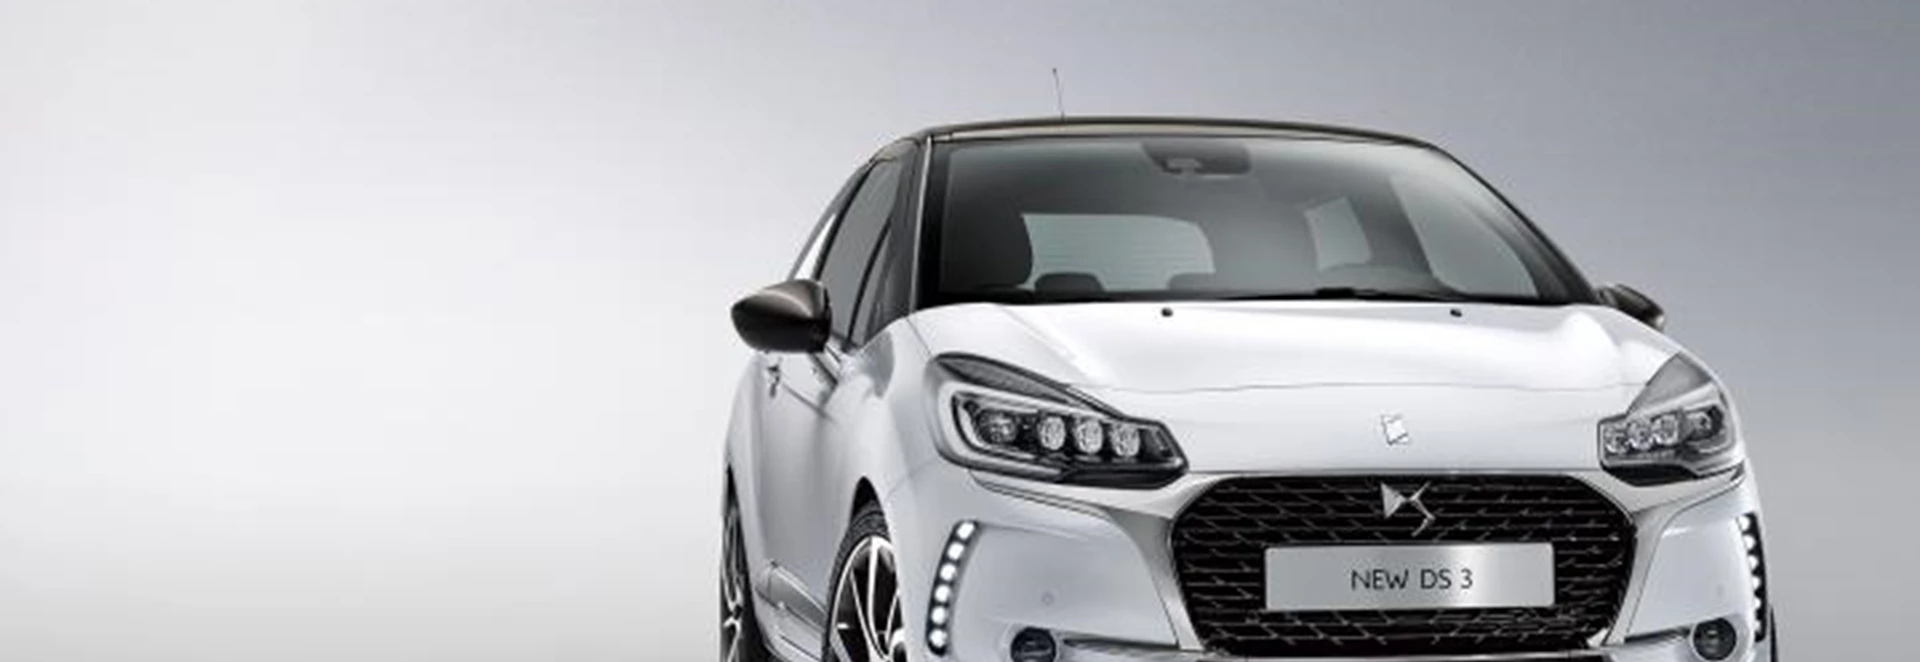 Pricing for facelifted DS 3 announced